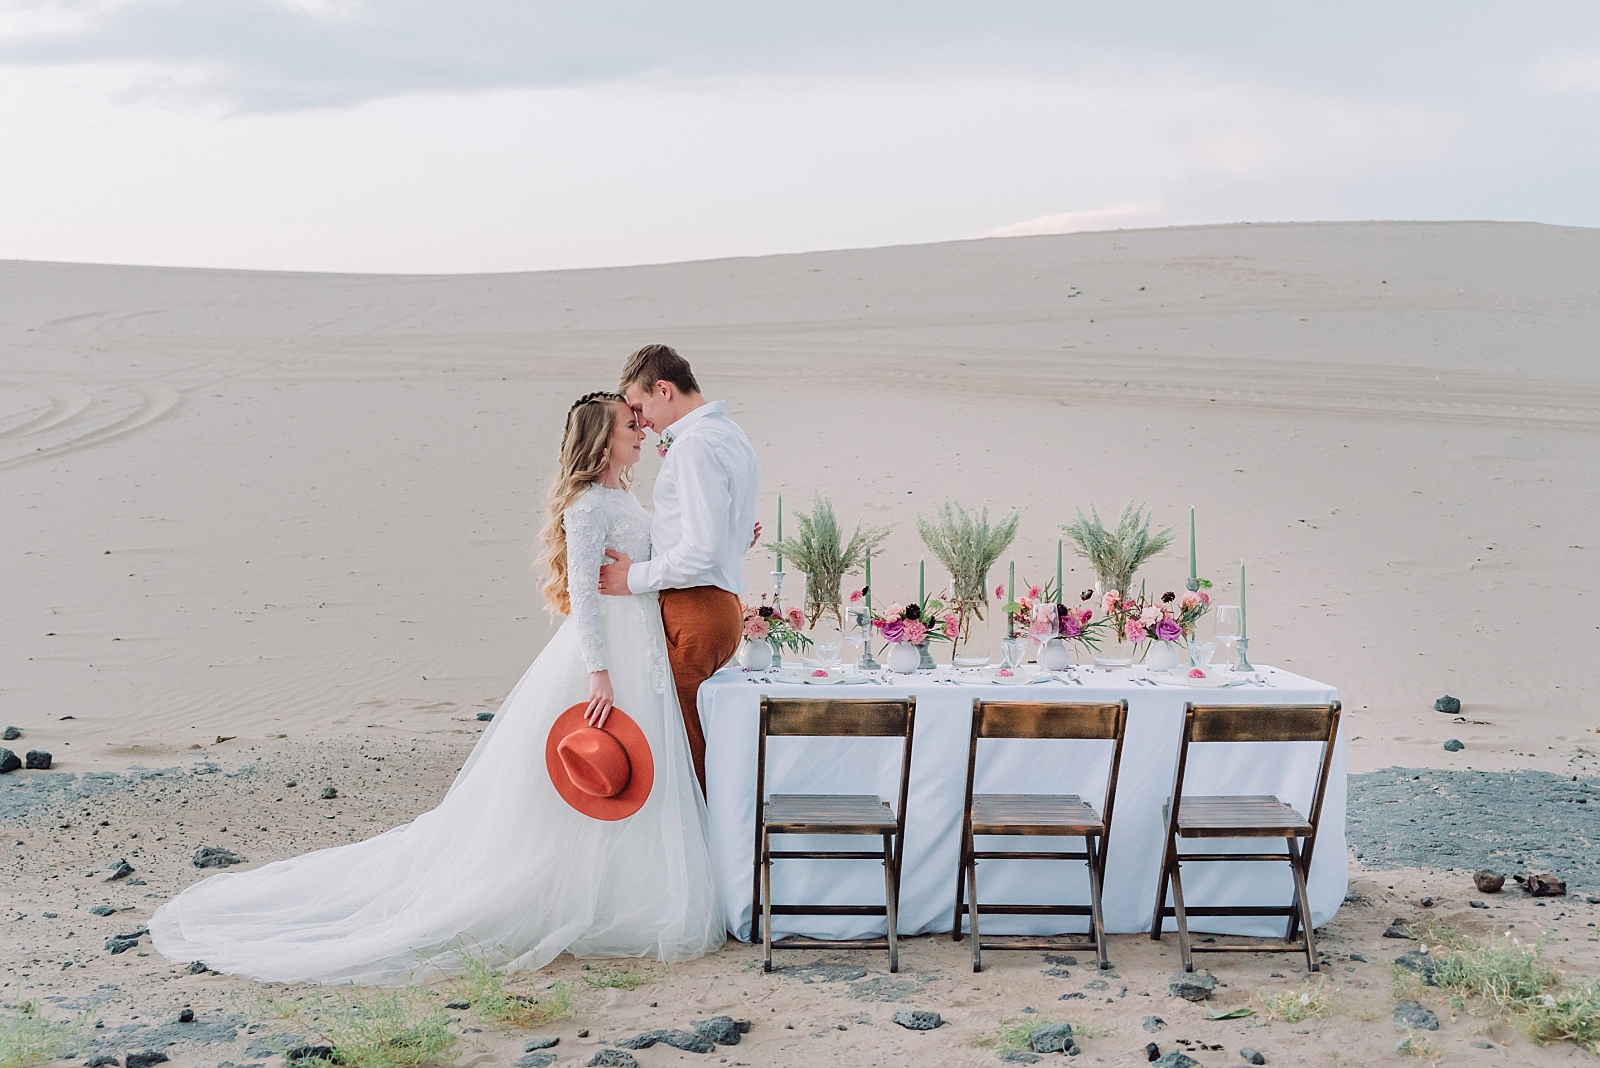 Five Best Places to Find Wedding Inspiration Online